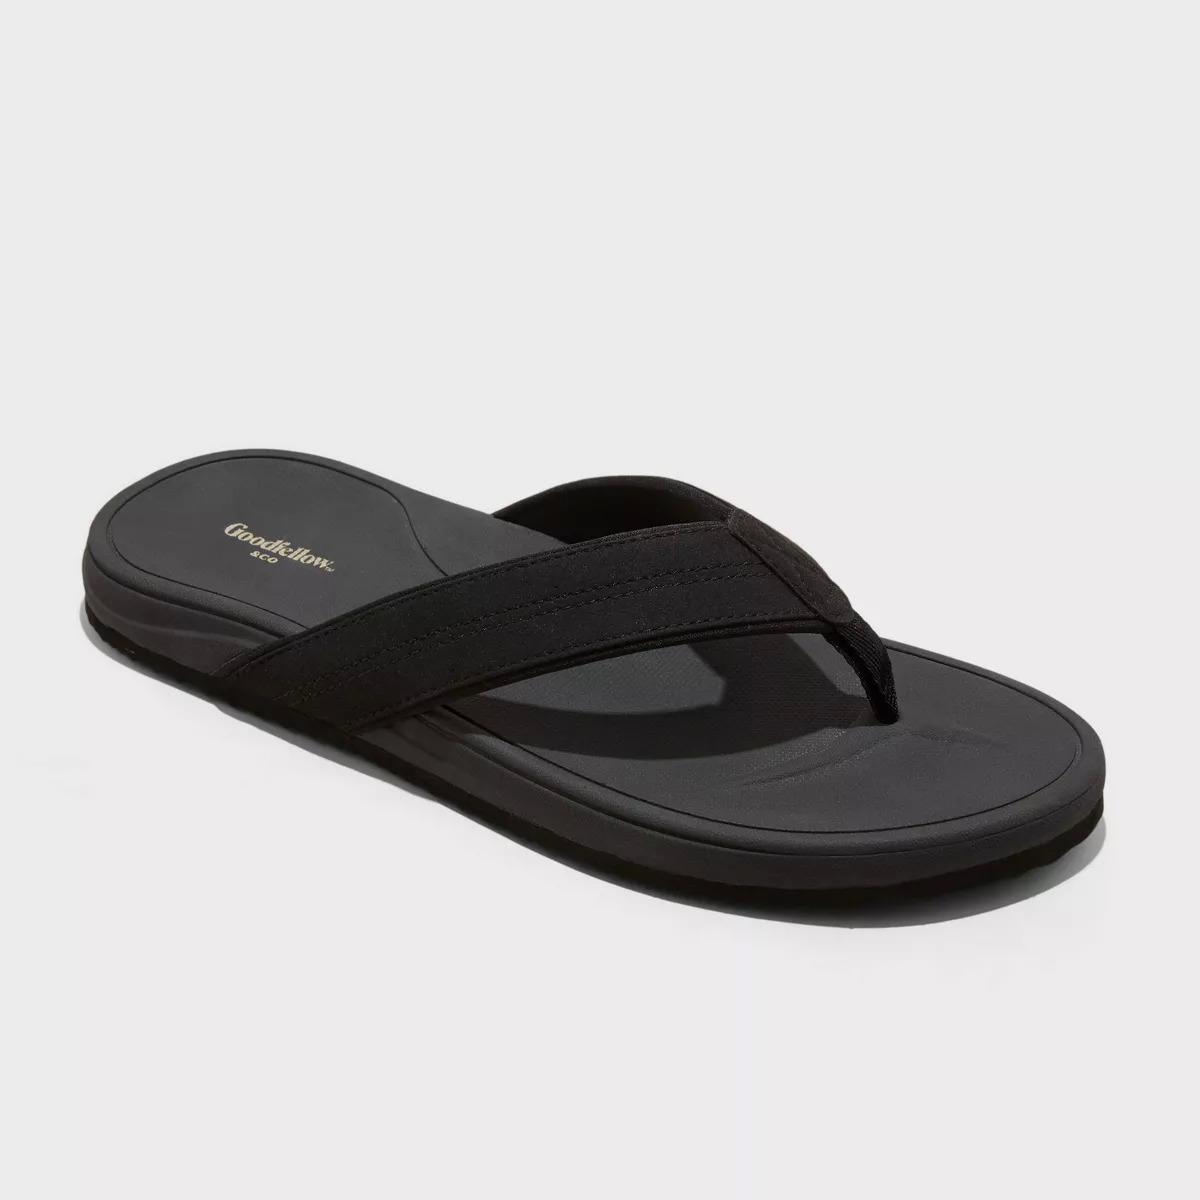 Goodfellow & Co Men's Ian Comfort Flip Flop Thong Sandals (3 Colors) $17.50 & More + Free Store Pickup at Target or FS on $35+